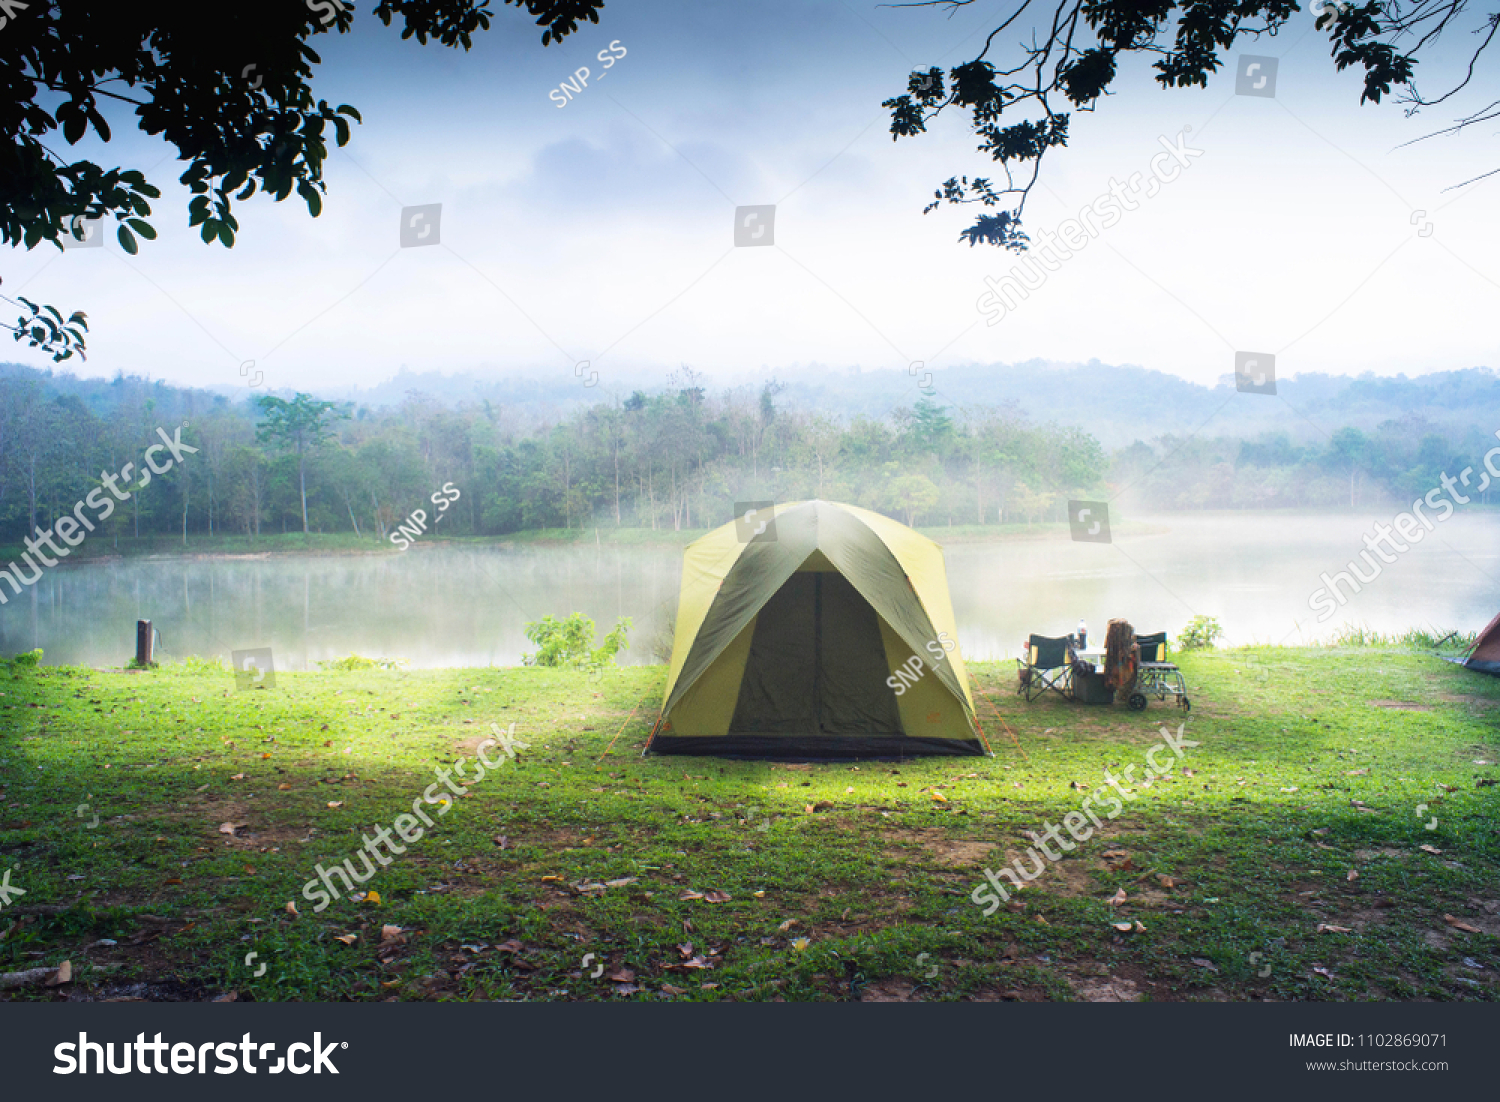 Camping tent with lake background. #1102869071